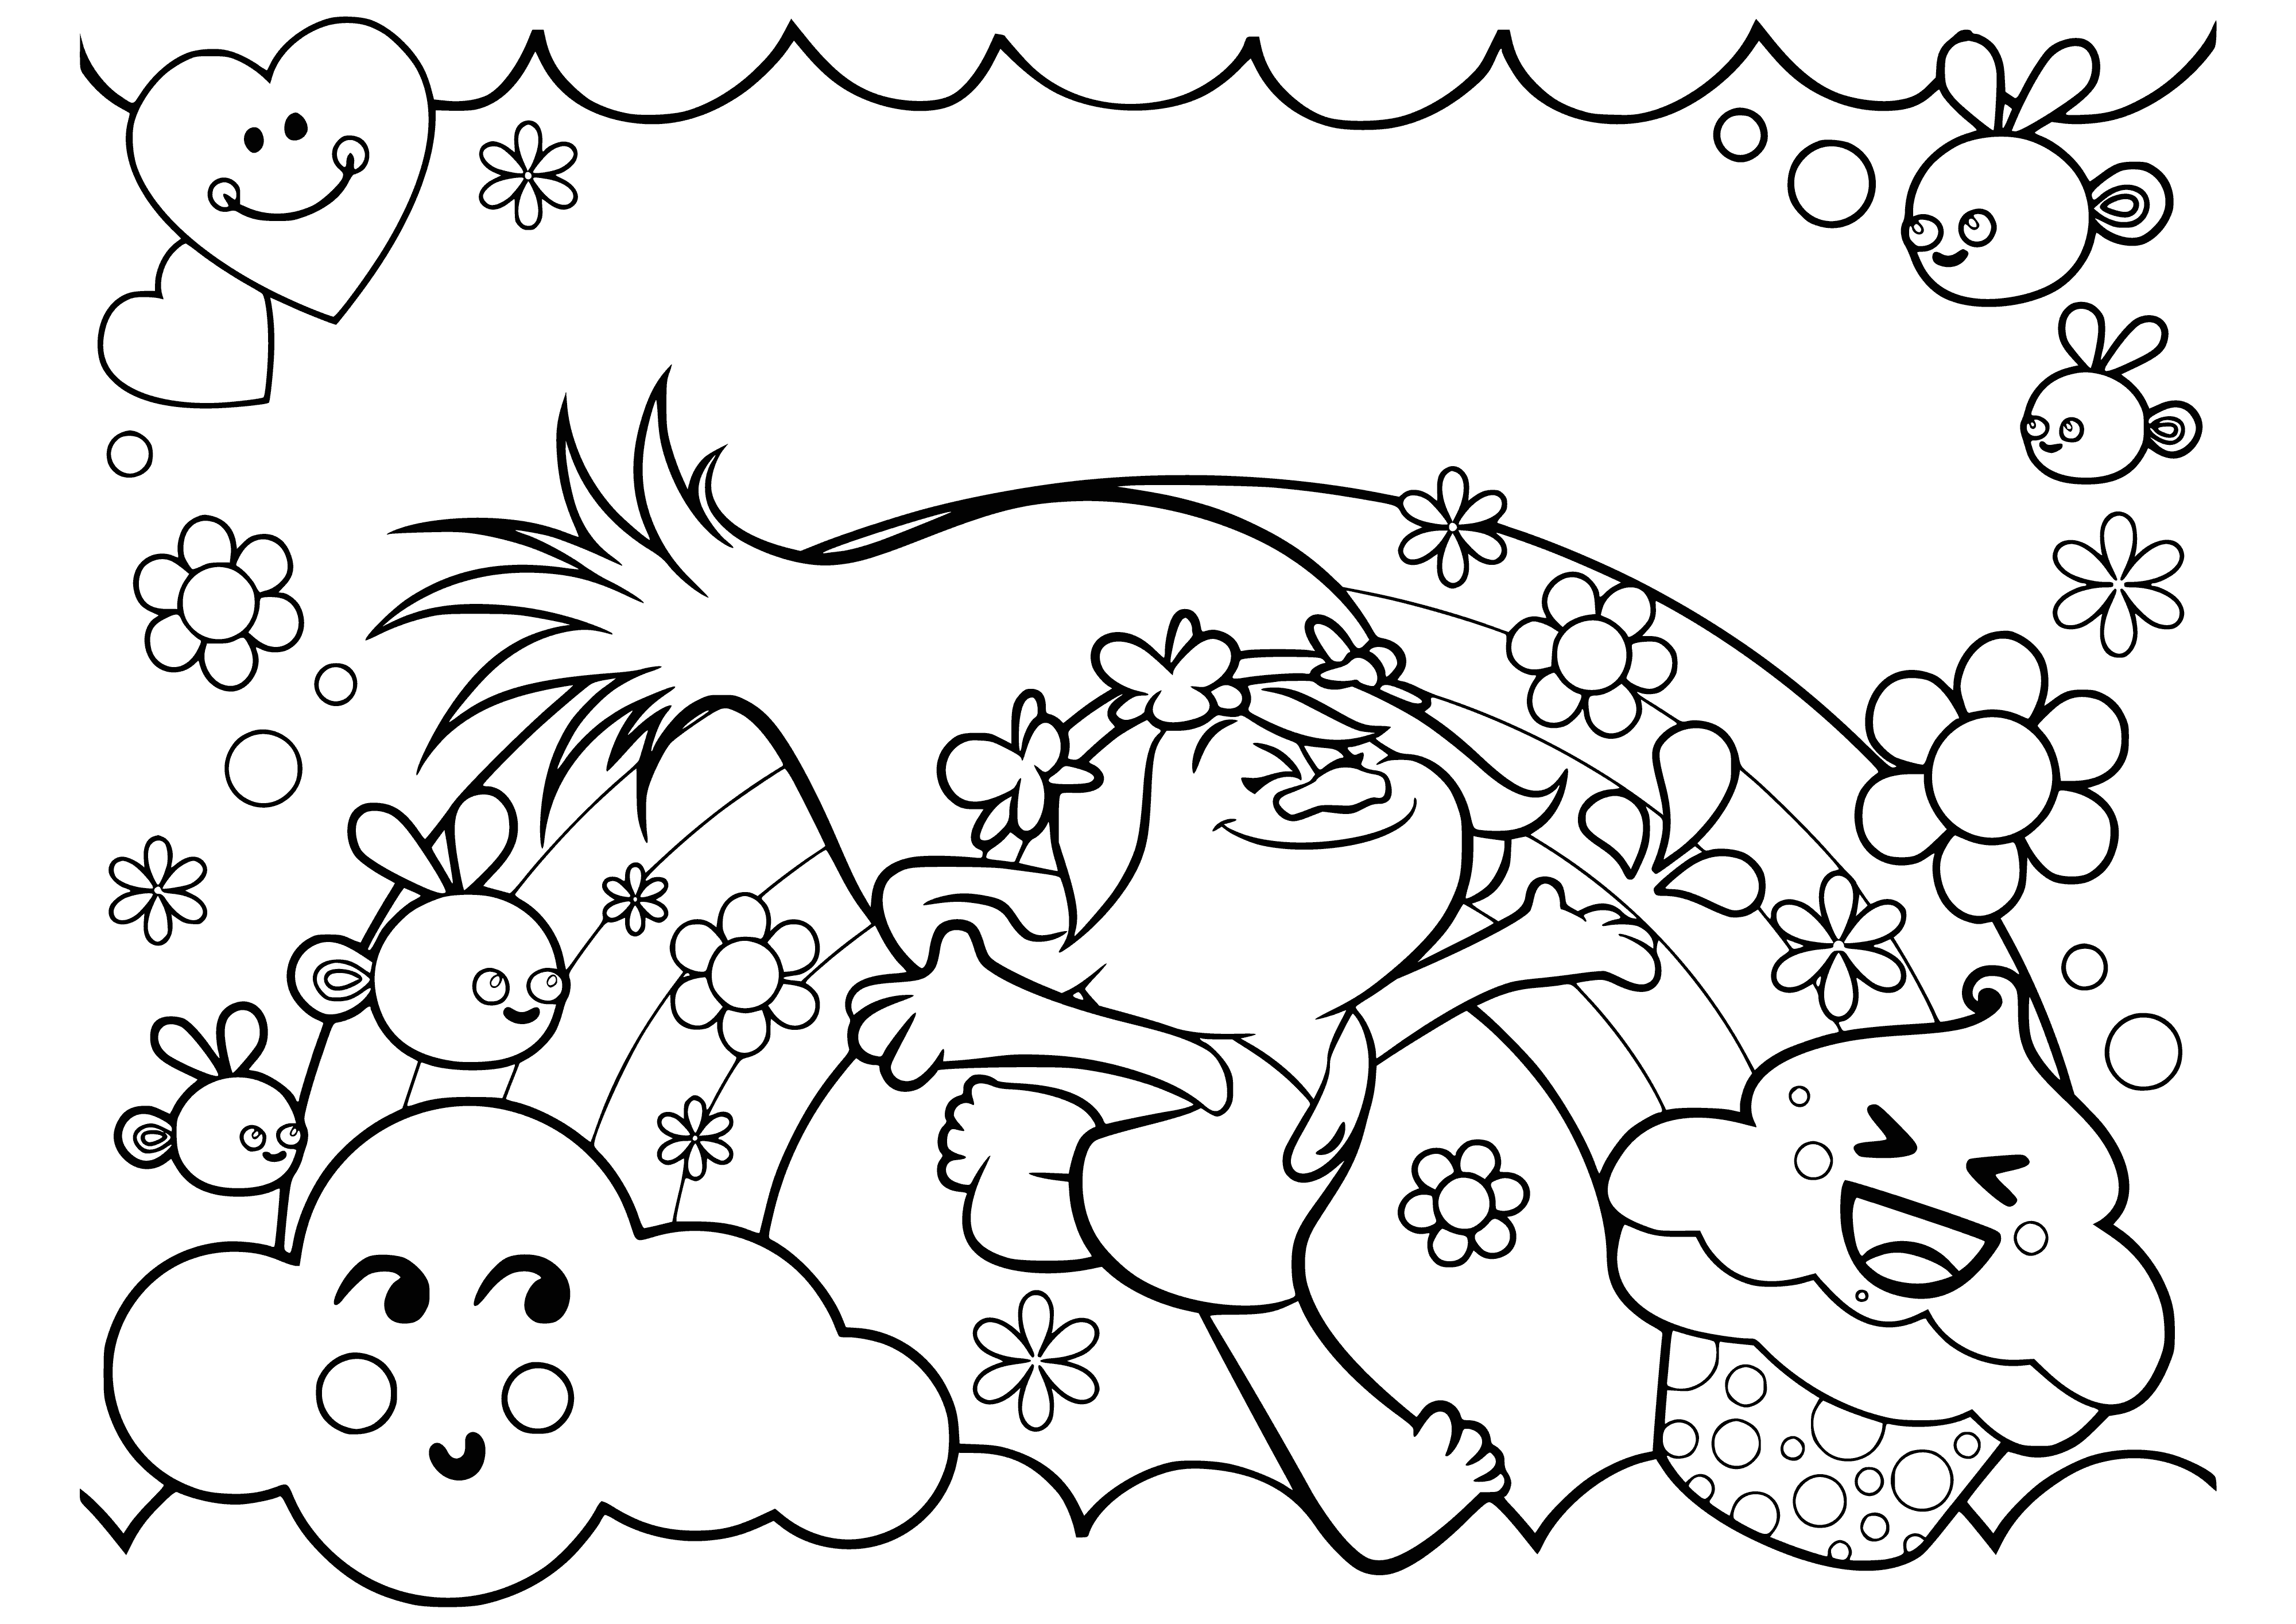 coloring page: Princess Rosette is beautiful, with long blonde hair, pink gown & tiara, and a pink rose in her hands.